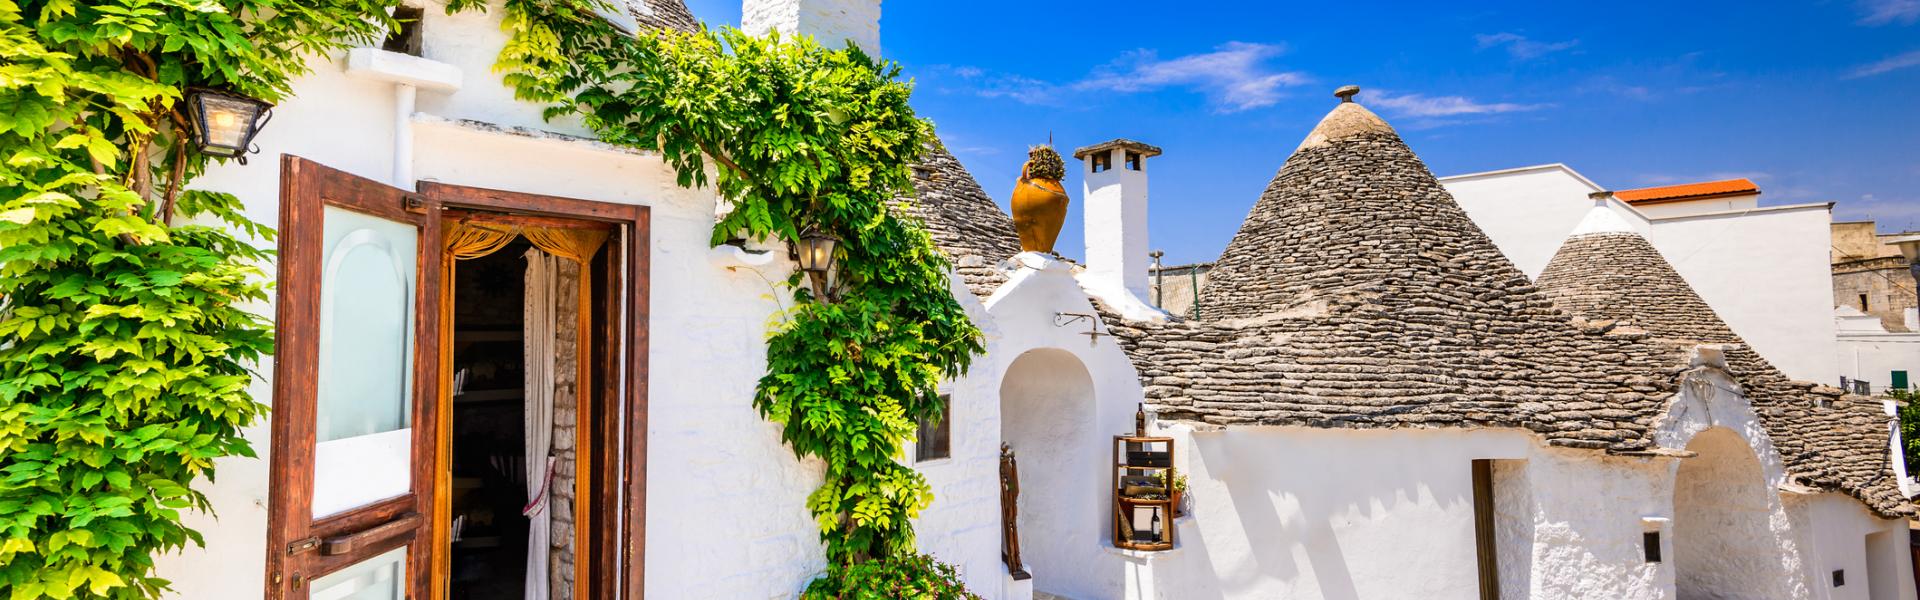 Holiday lettings & accommodation in Puglia - Wimdu